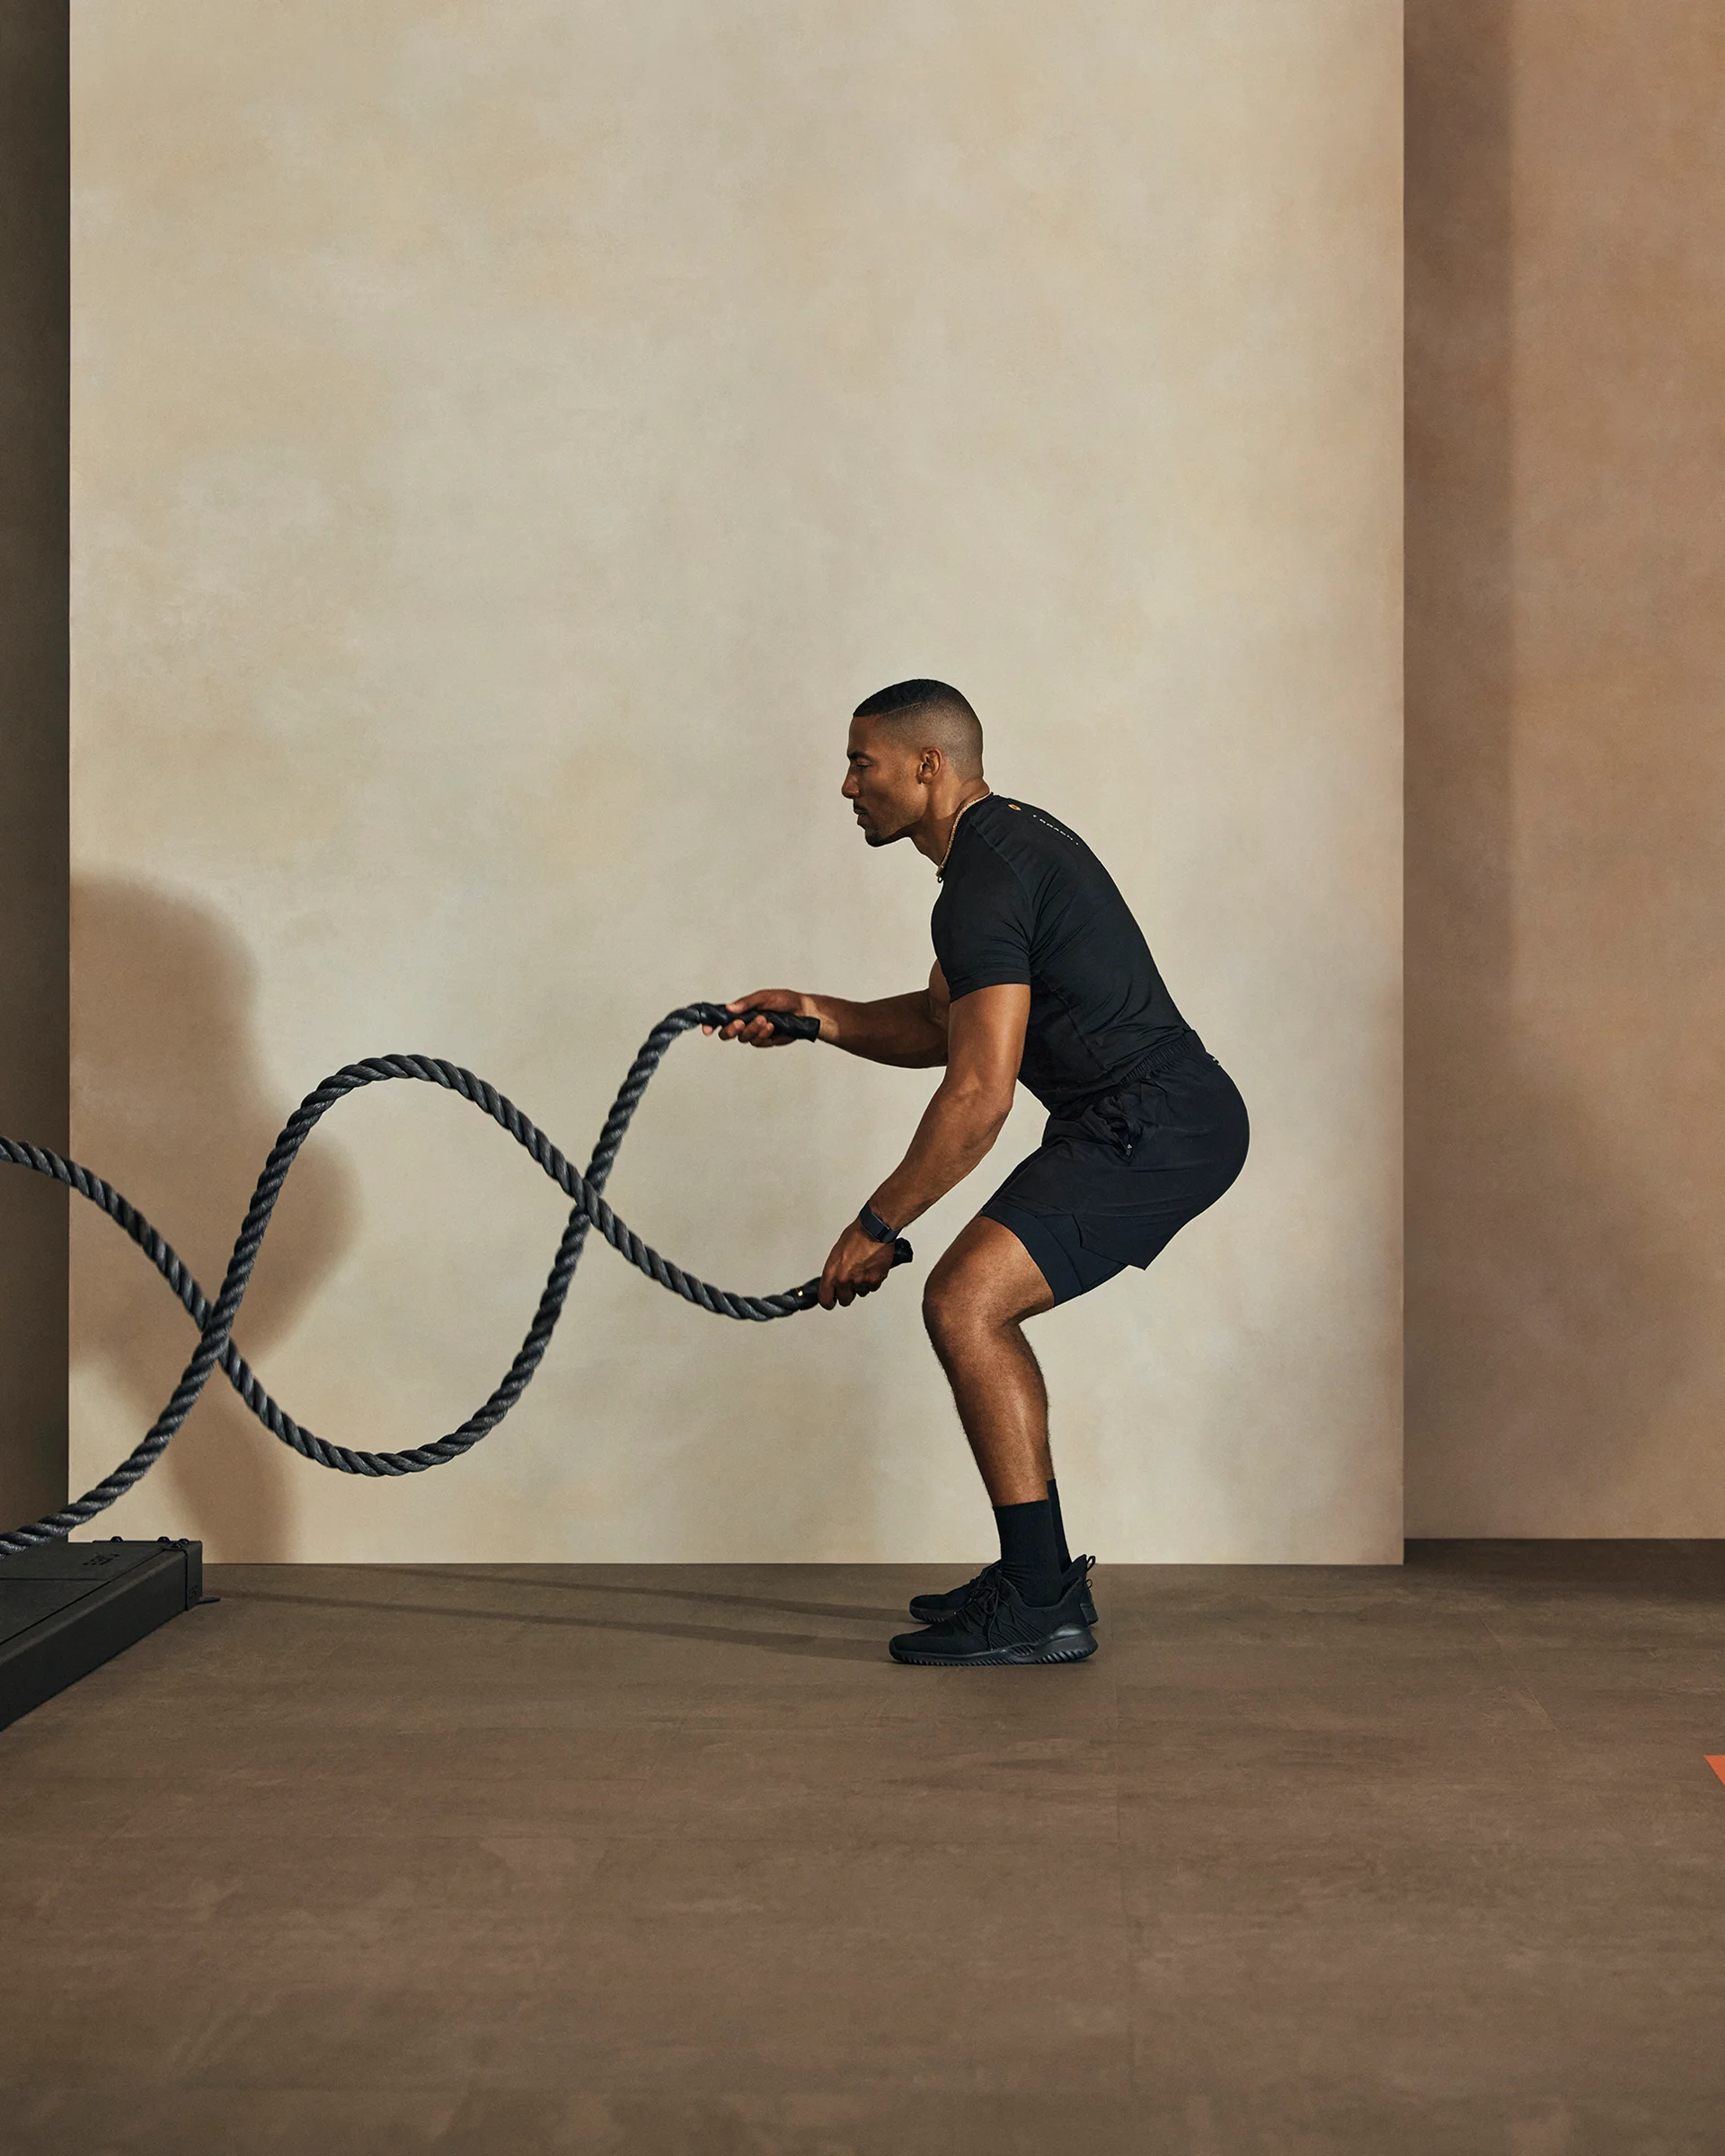 A Life Time member holding battle ropes for an Alpha class.